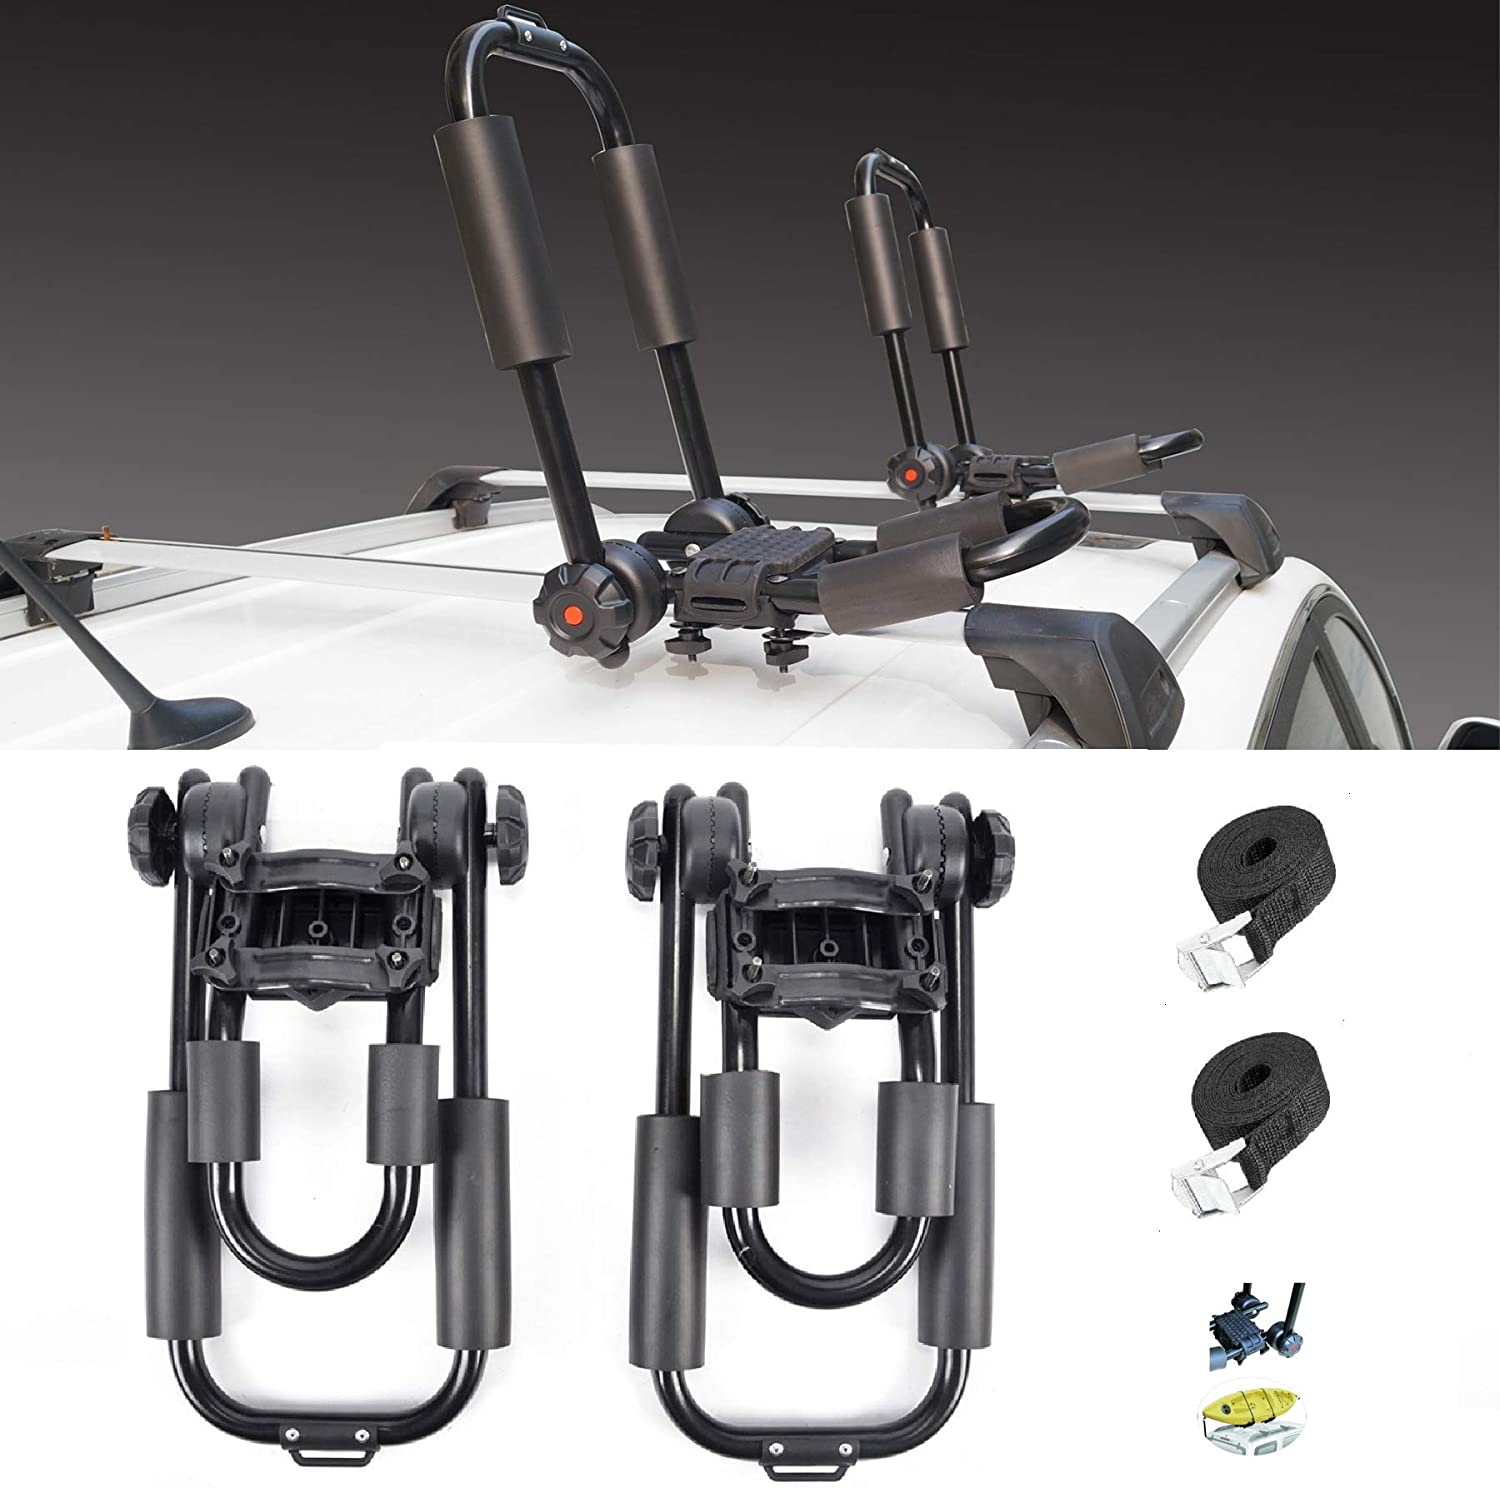 NOPOCA NP5674 Kayak/Canoe/Surf Ski/Boat/Snowboard 2pc J-Style Roof Rack Carrier Mounted on Car SUV and Truck Crossbar